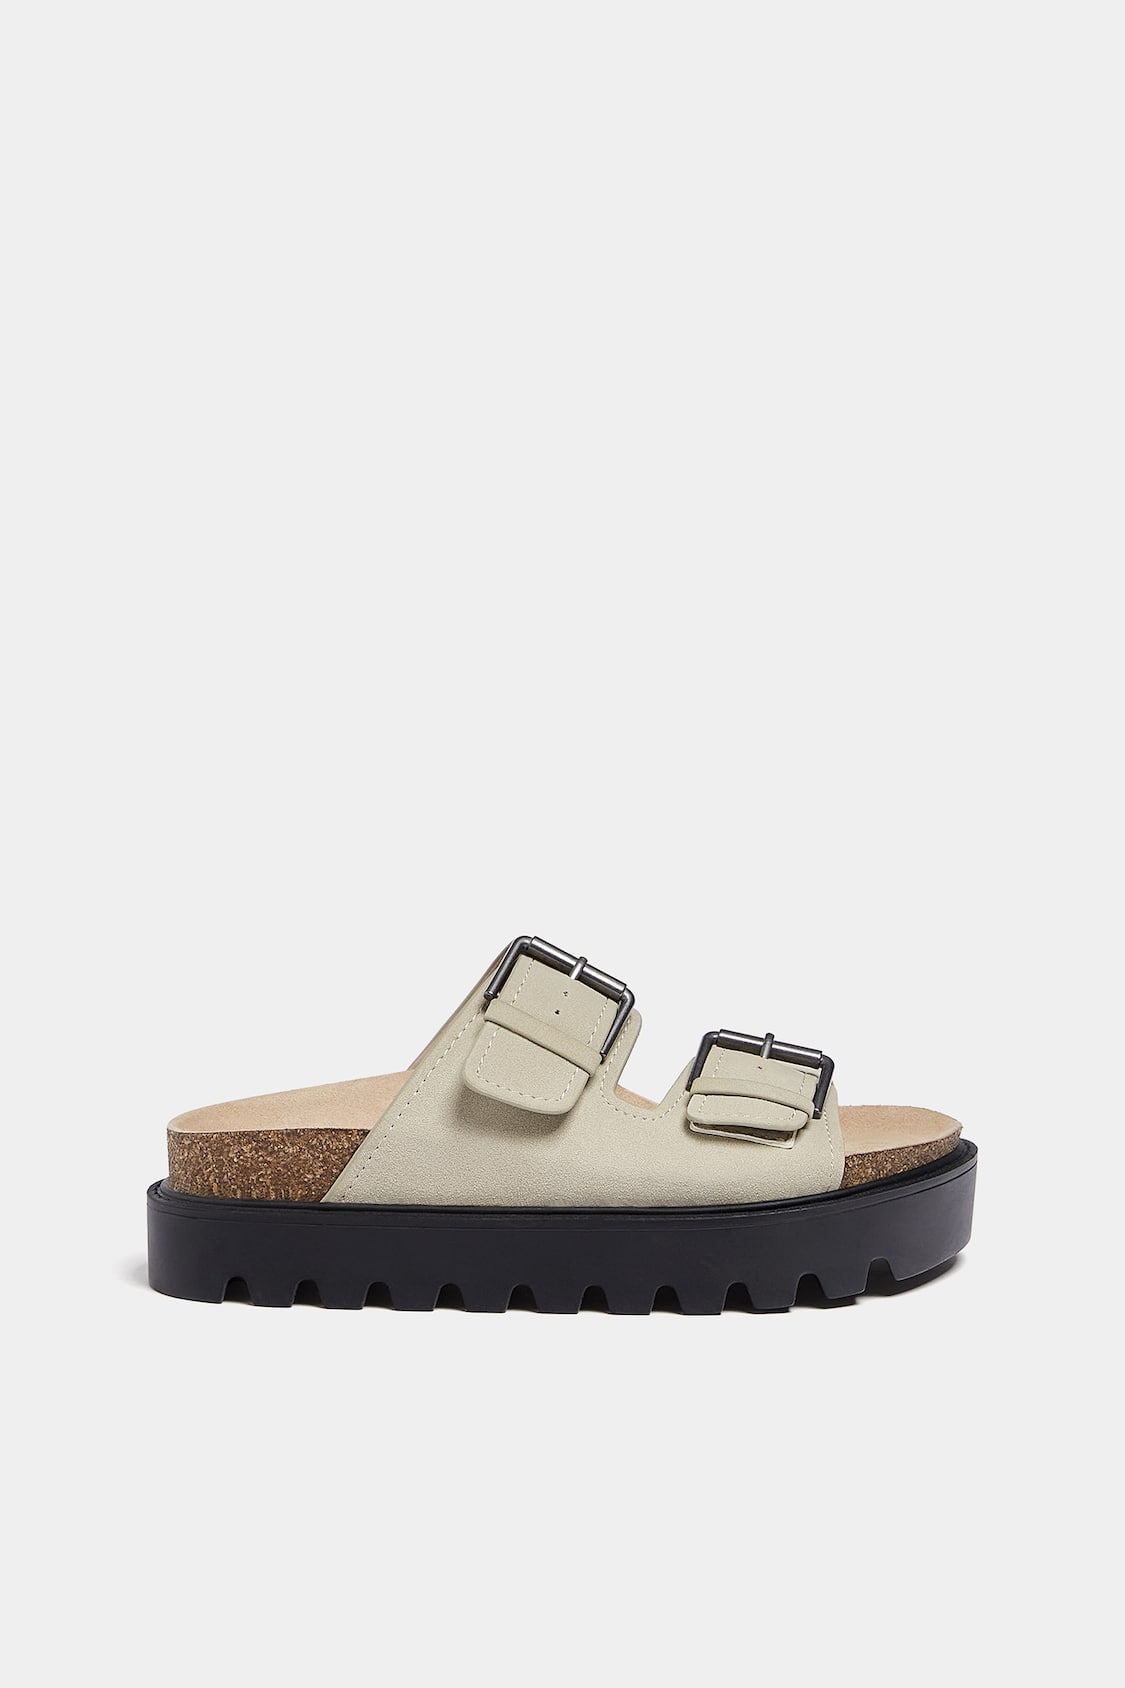 I'm Replacing My Sneakers With These Comfy Sandals for Summer